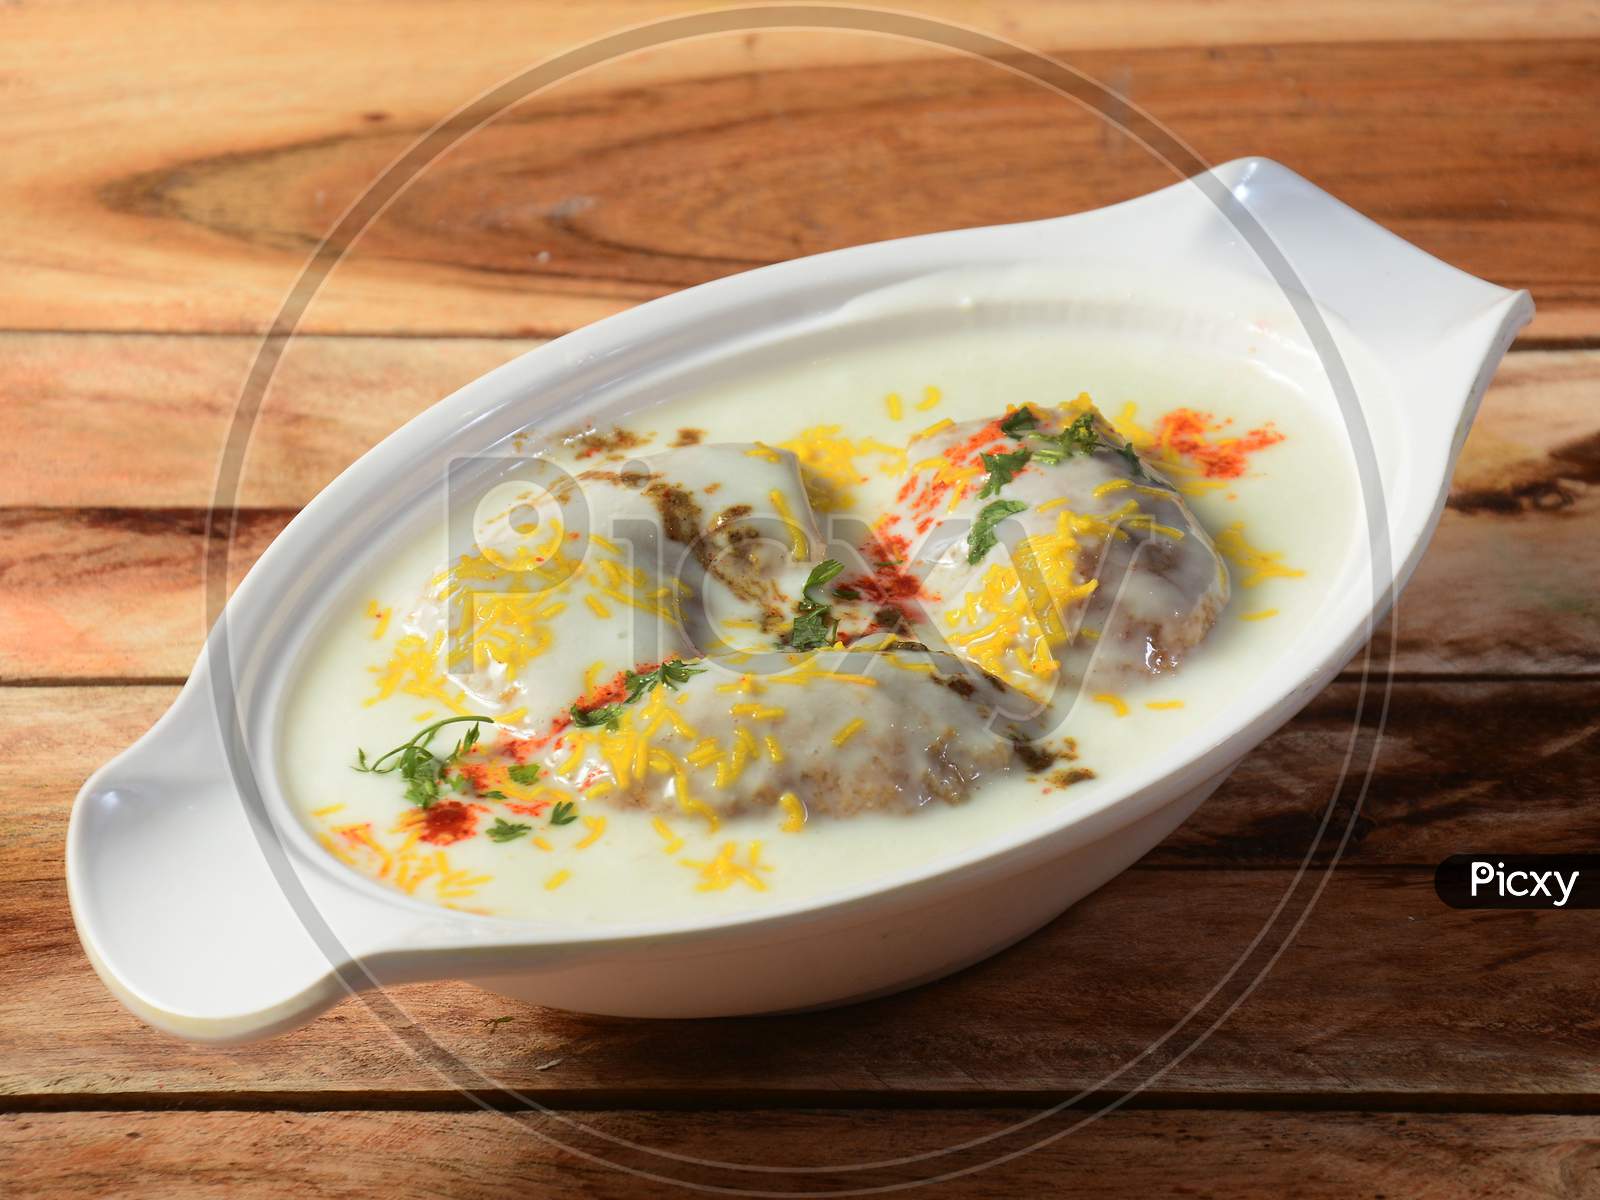 Dahi Vada Or Bhalla Is A Popular Snack In India. It Is Prepared By Soaking Vadas In Thick Dahi / Curd. Garnished With Coriander Leaves, Grated Carrots And Kara Boondi With Tamarind Chutney, Selective Focus